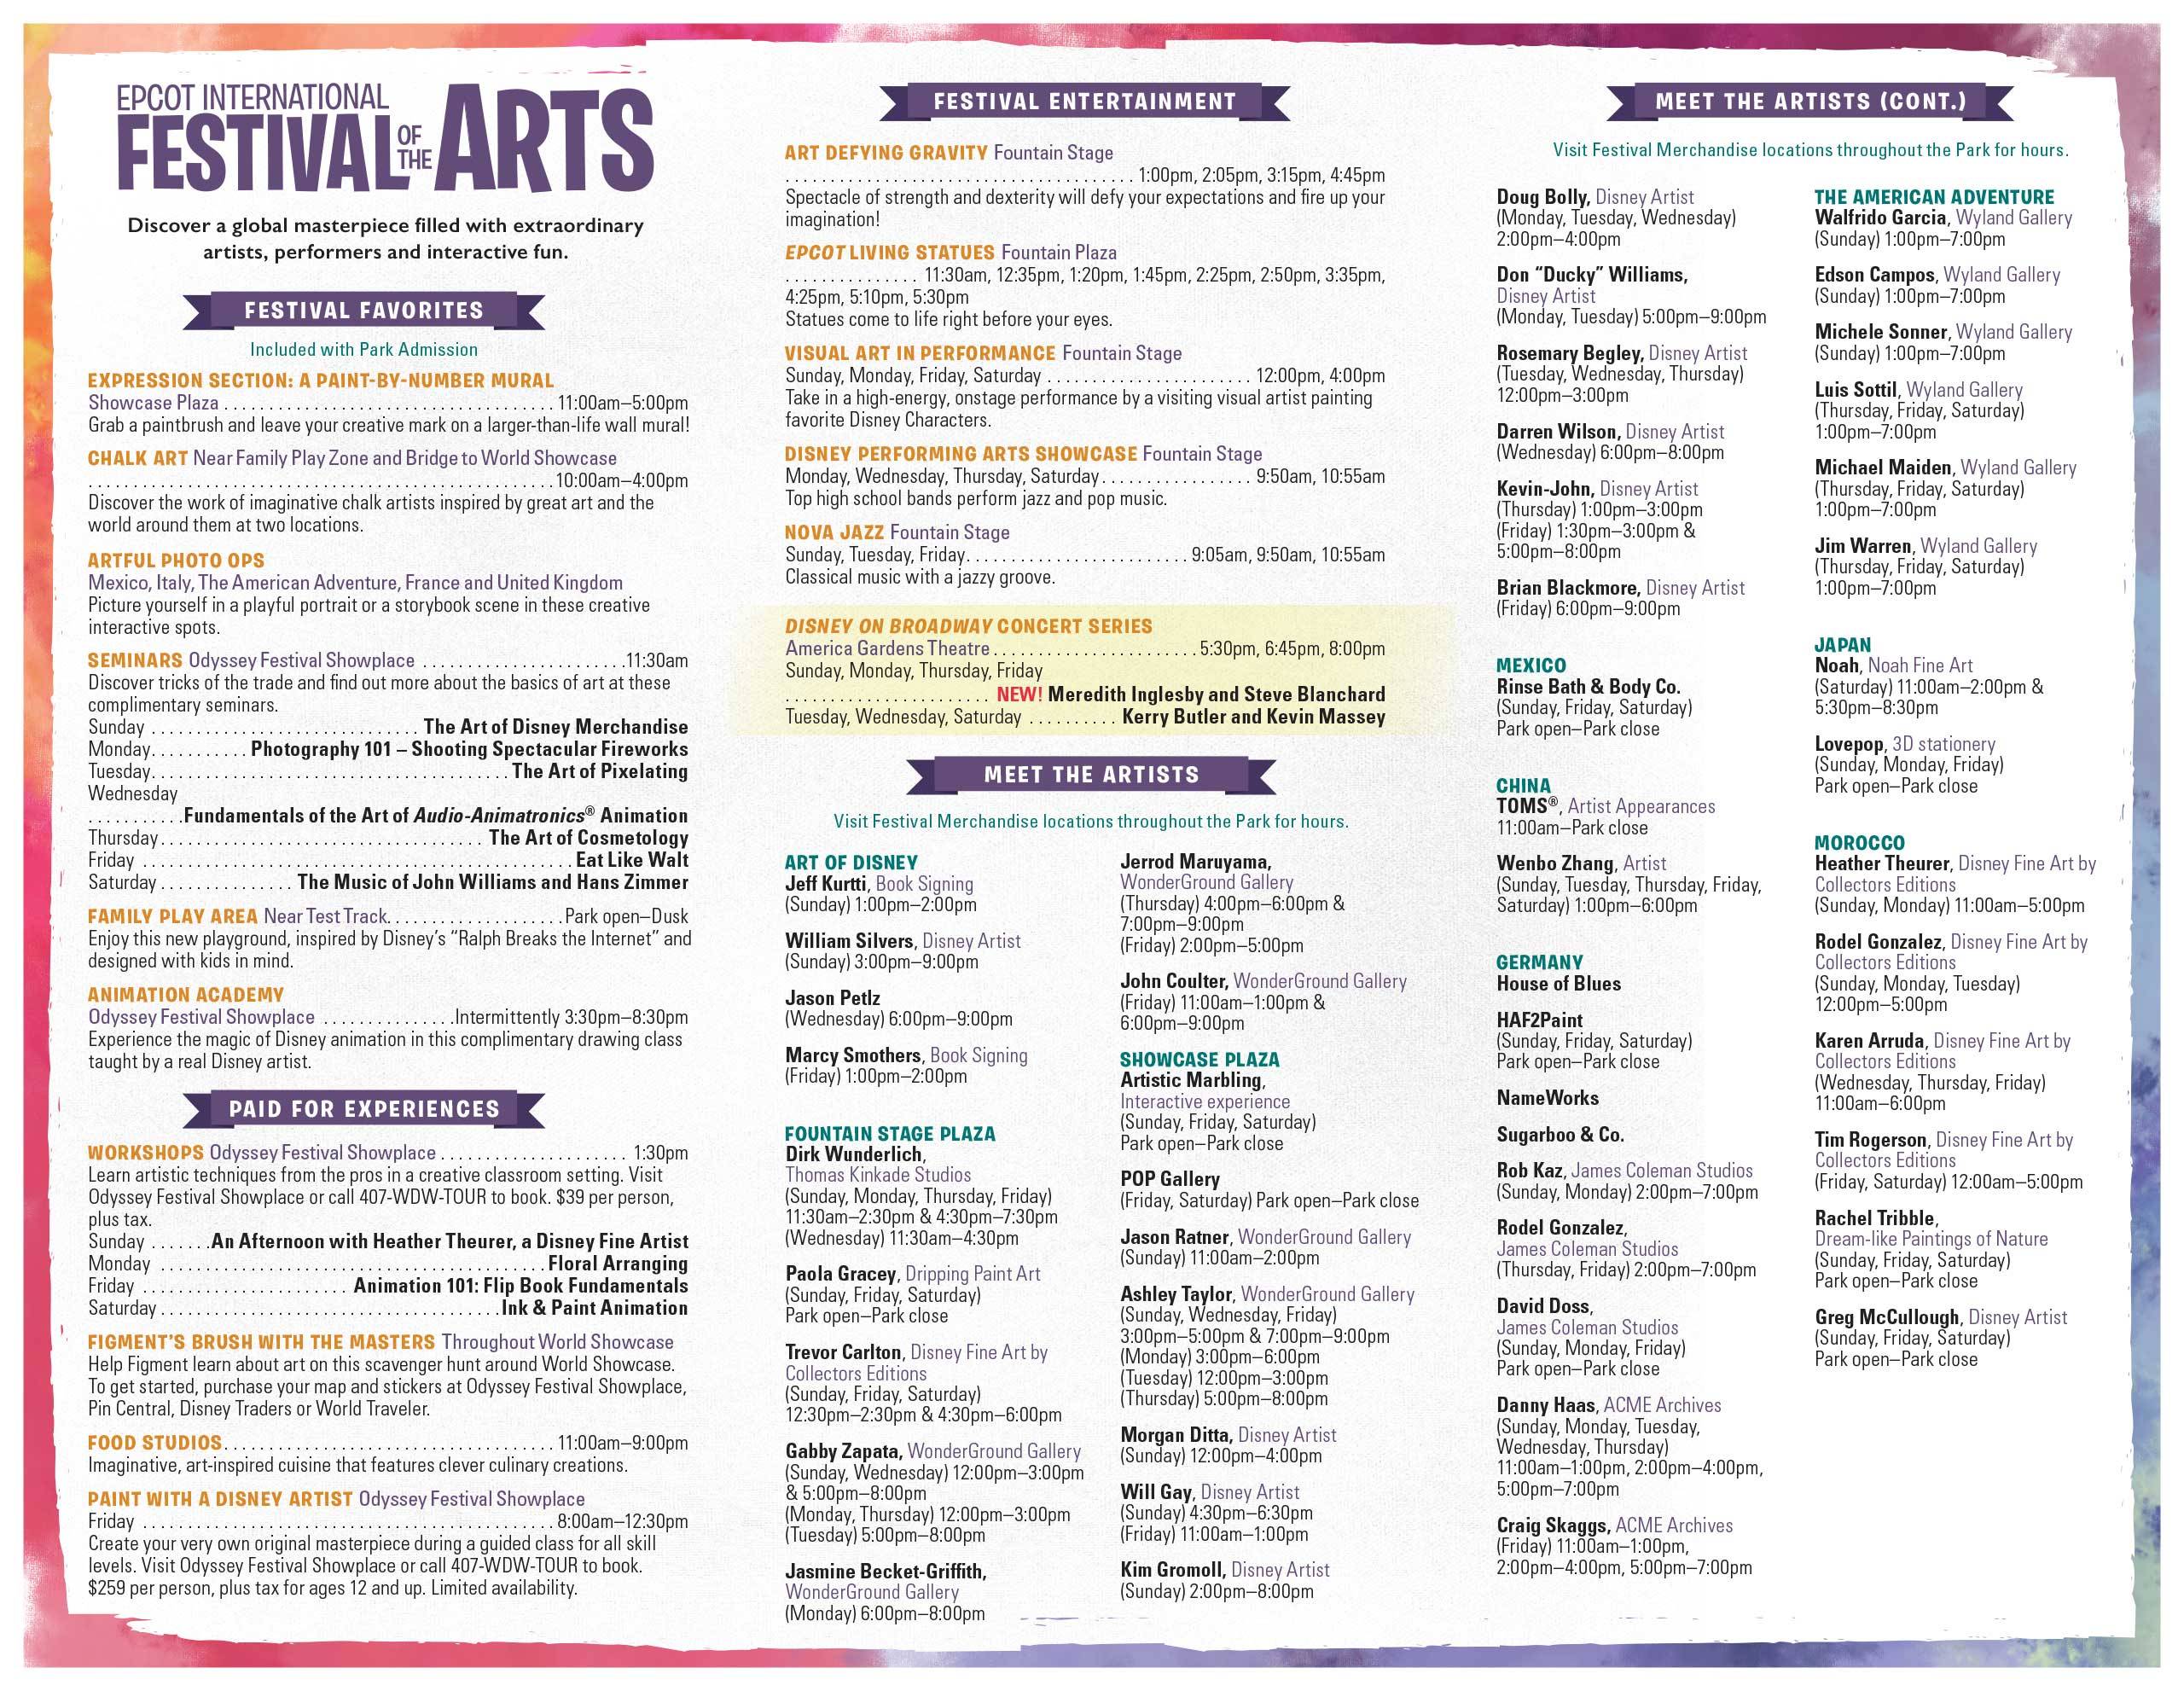 2019 Epcot Festival of the Arts times guide